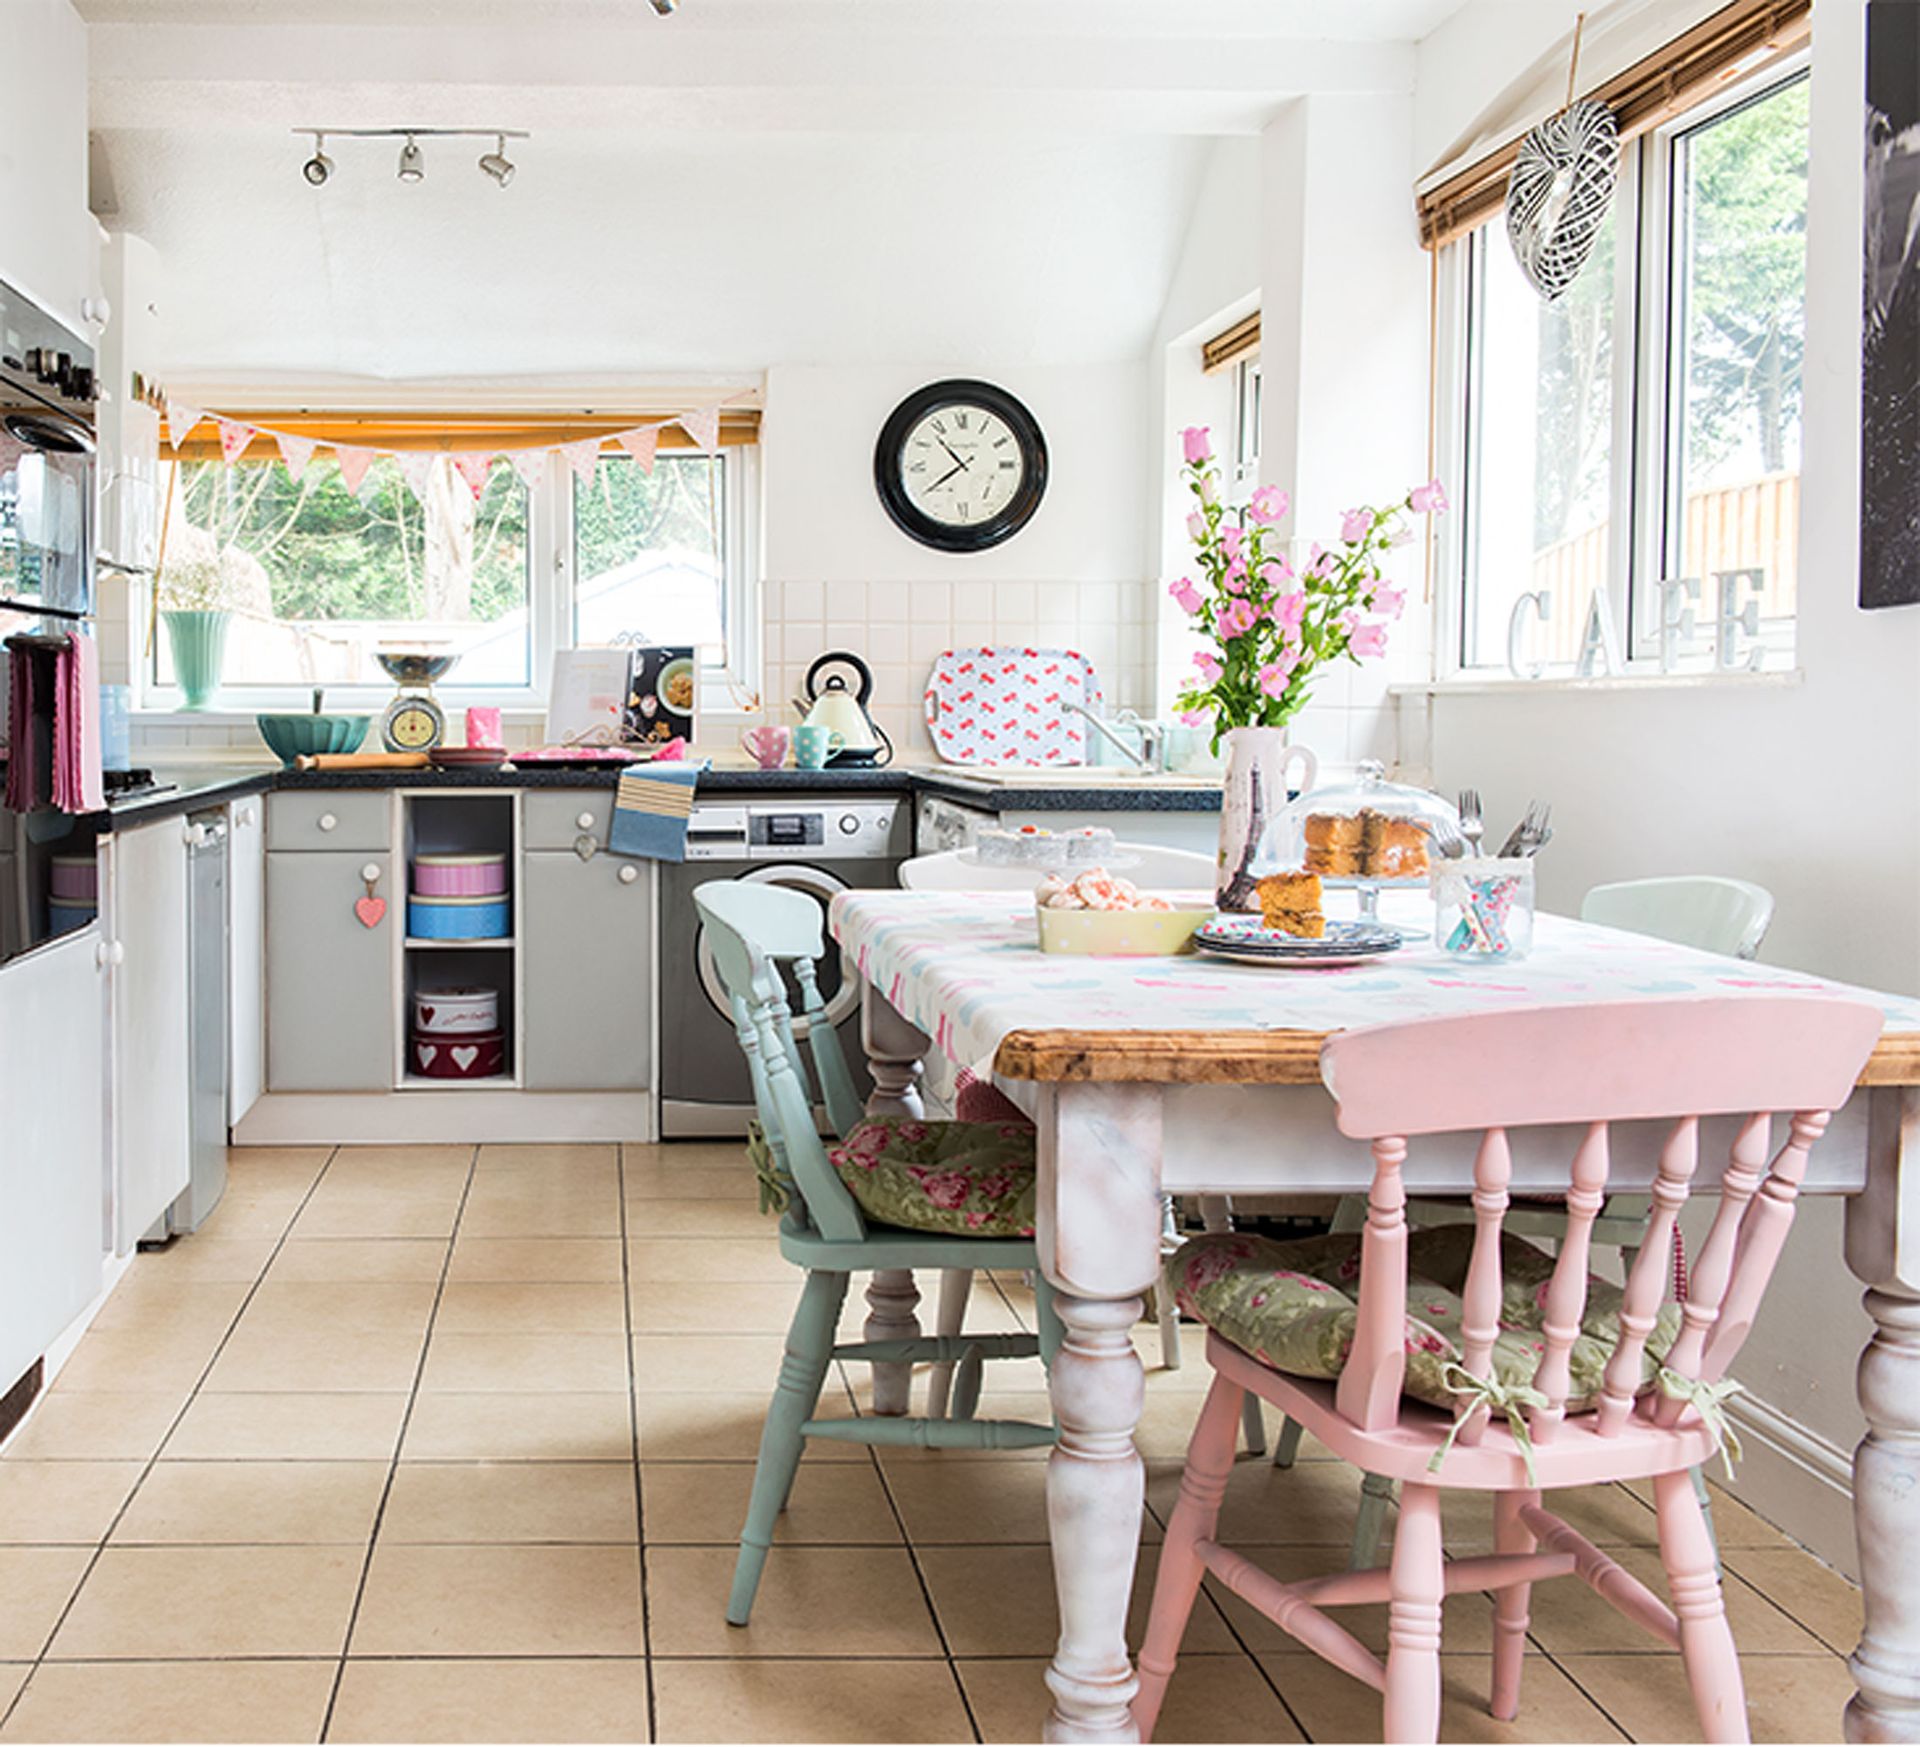 Shabby chic kitchen ideas - easy ways to create this relaxed, eclectic look